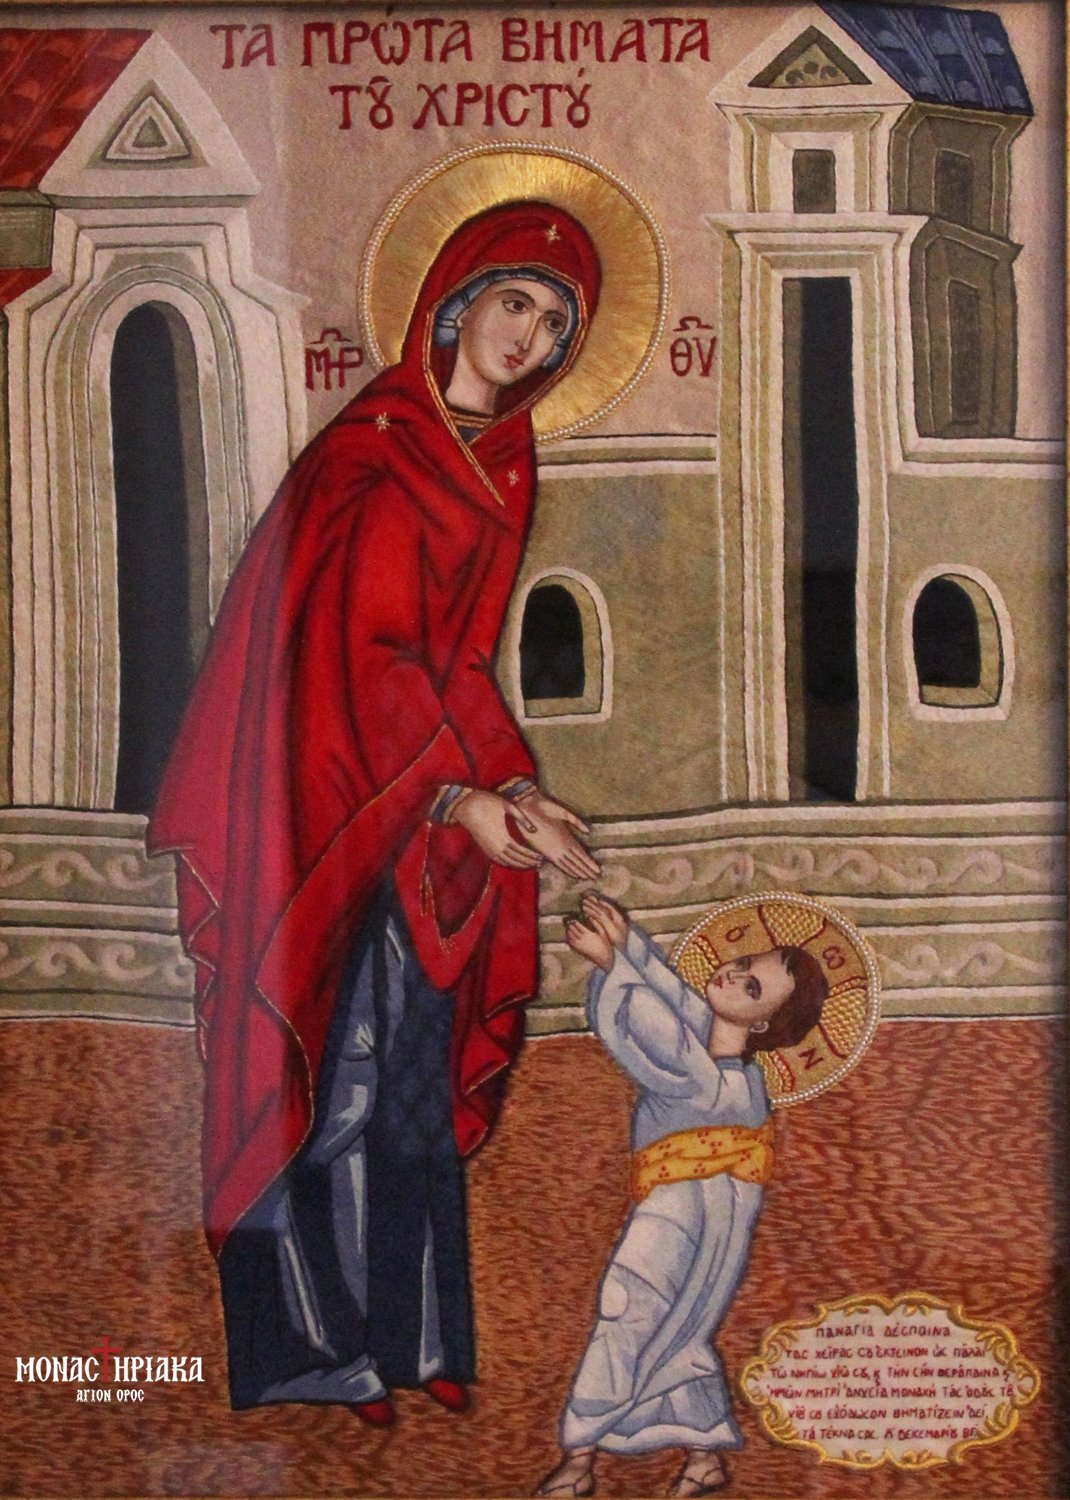 Rare depiction of the first steps of Jesus Christ as a child with the Virgin Mary, mother of God.